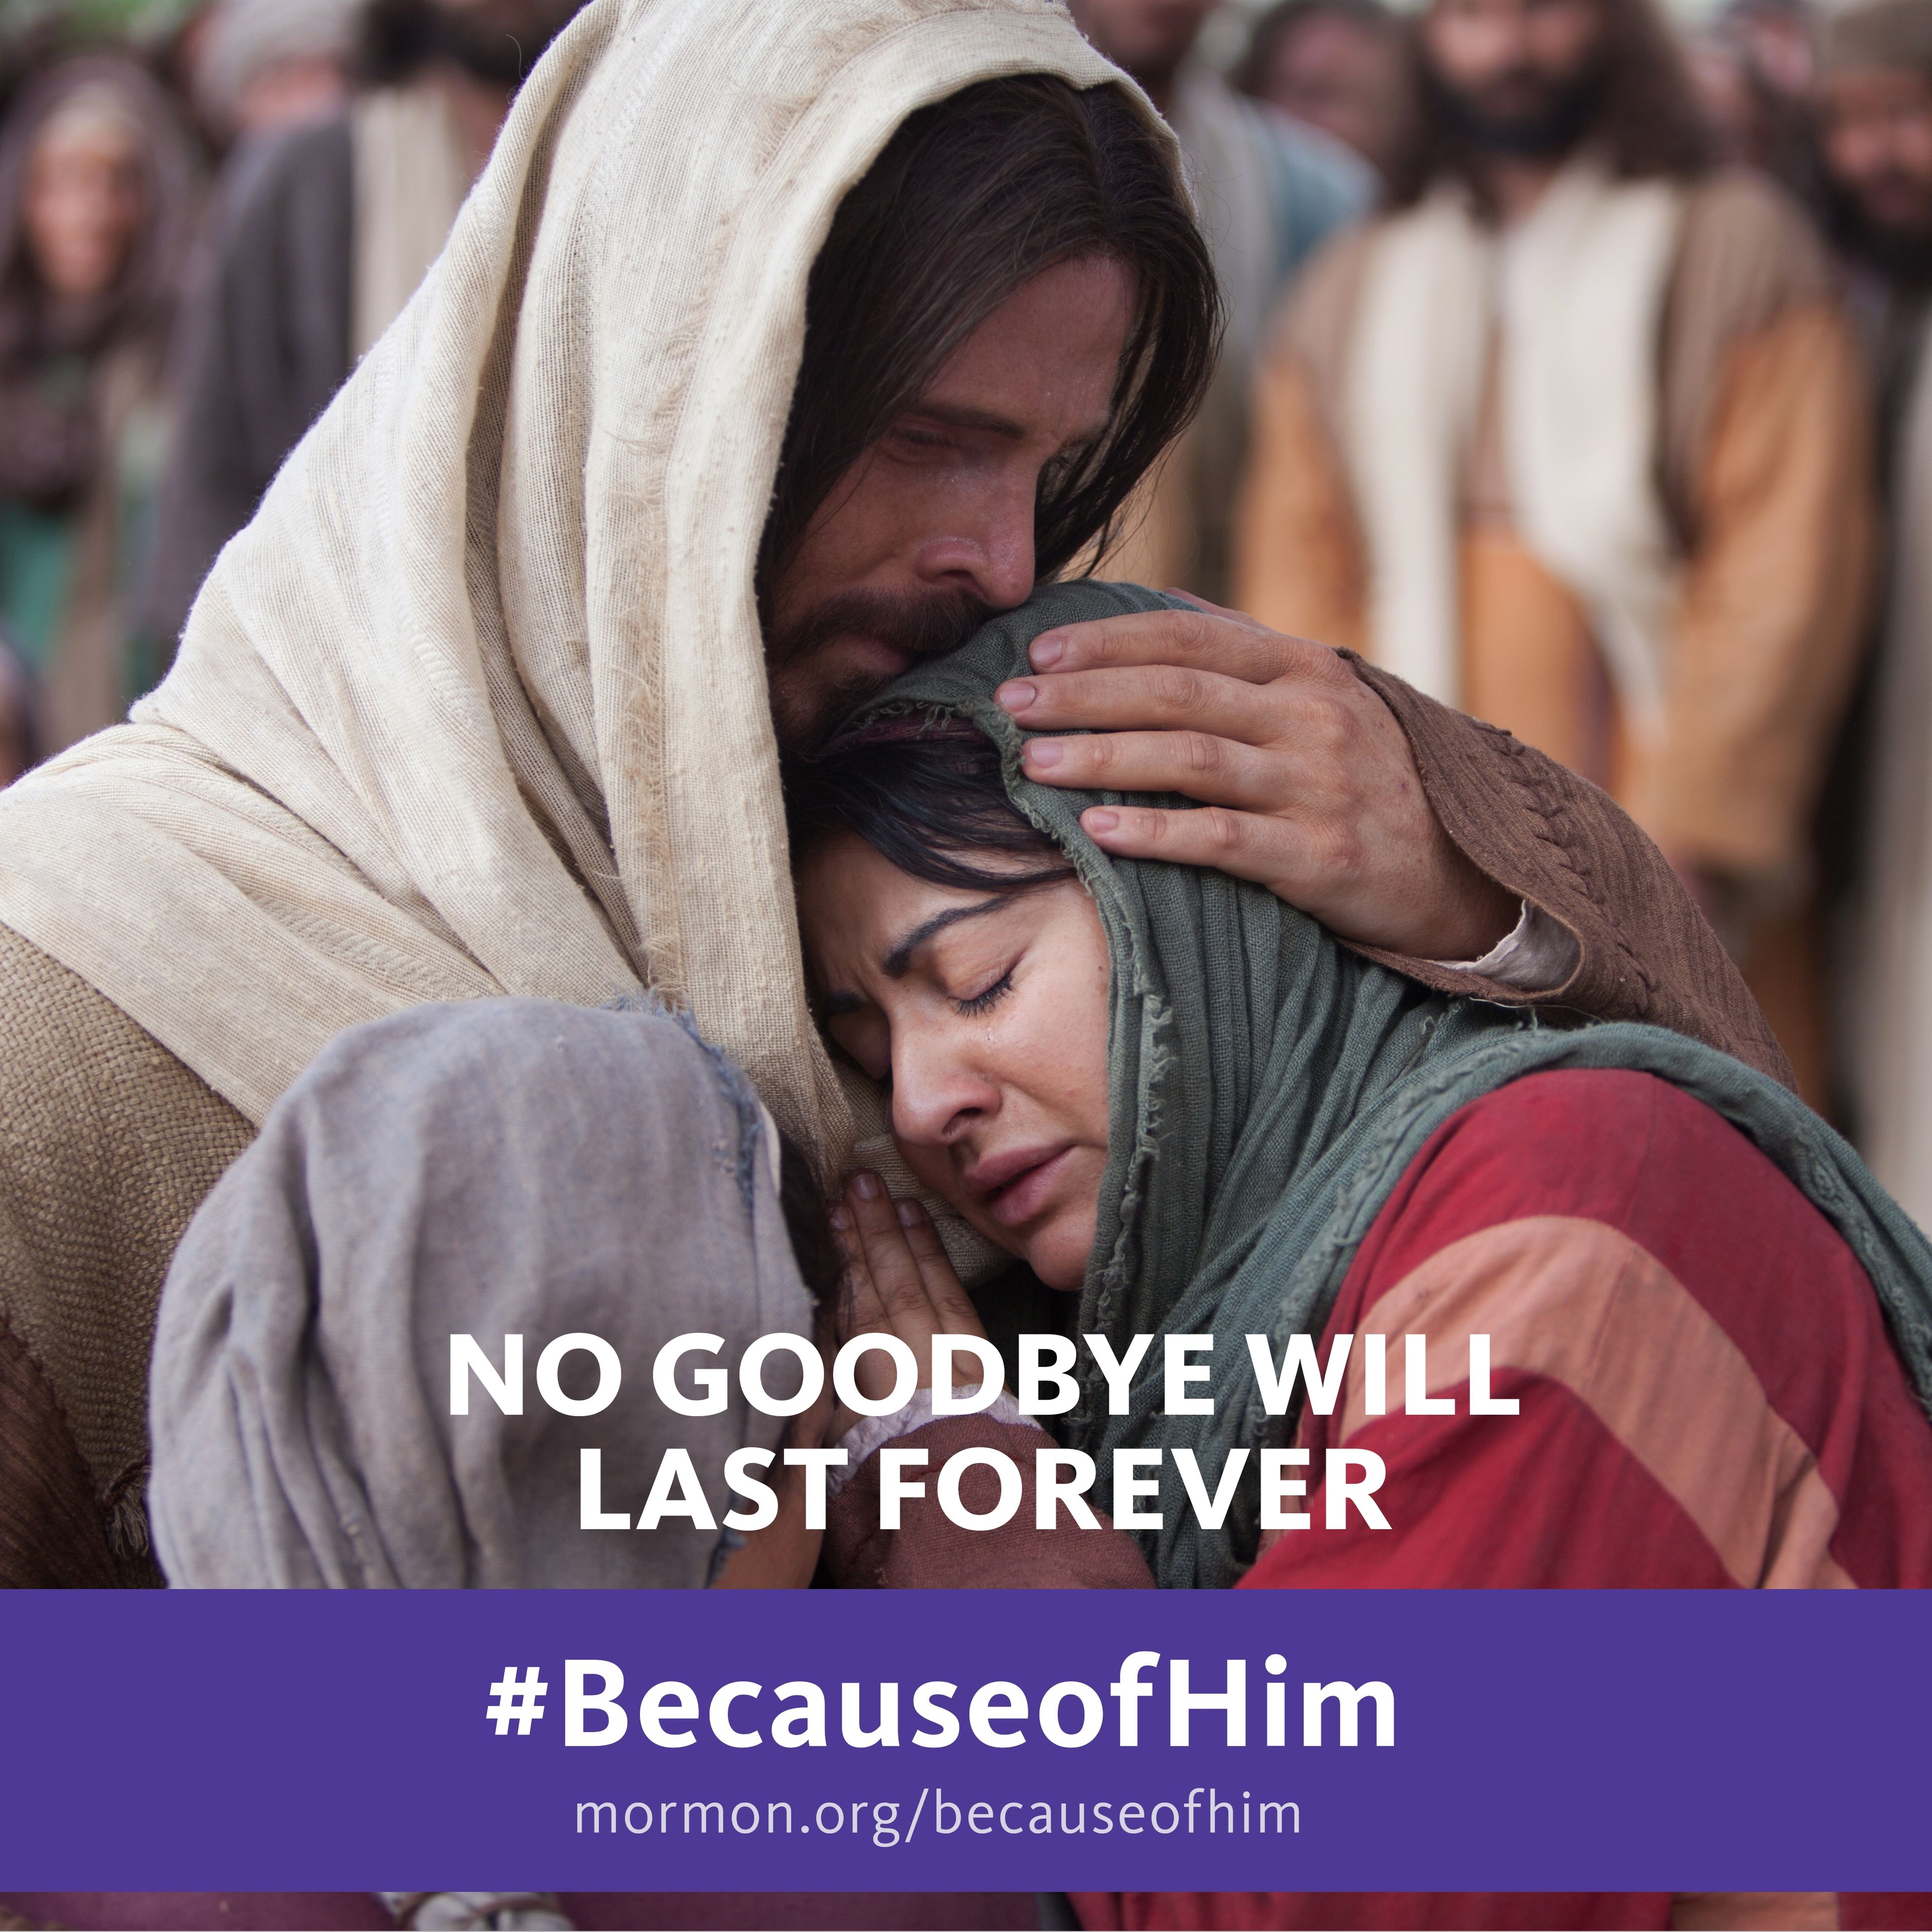 No good-bye will last forever. #BecauseofHim, mormon.org/becauseofhim © undefined ipCode 1.